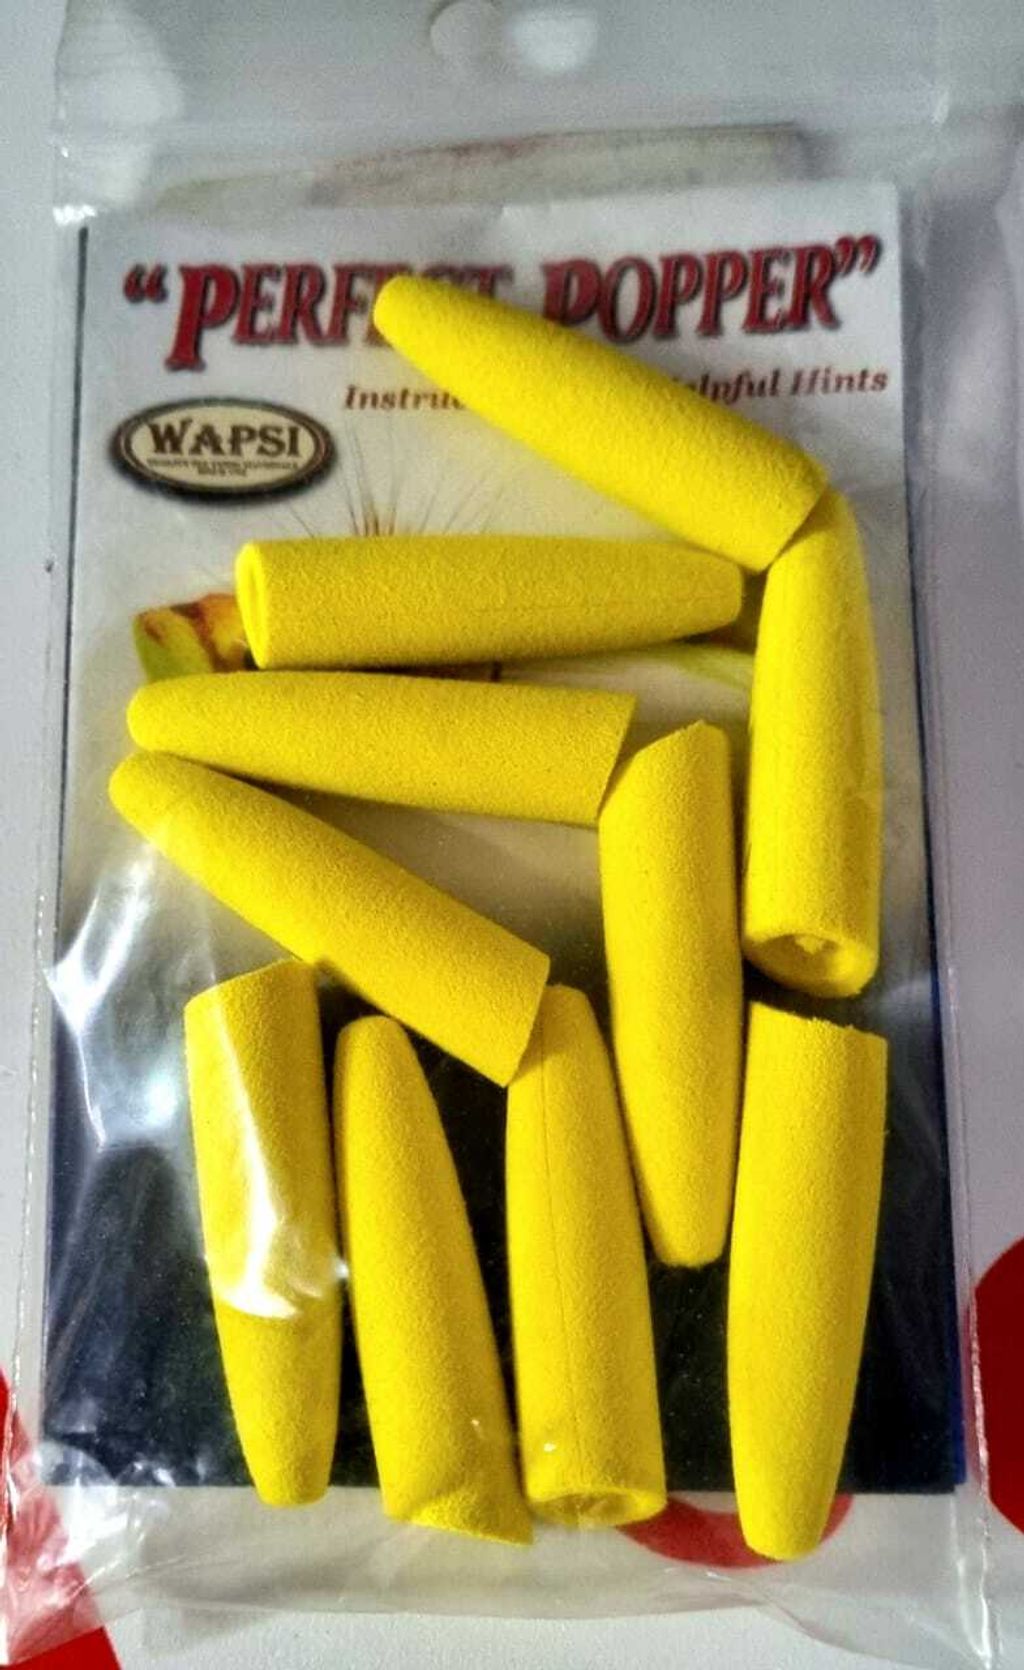 Wapsi Soft Pencil Poppers Yellow